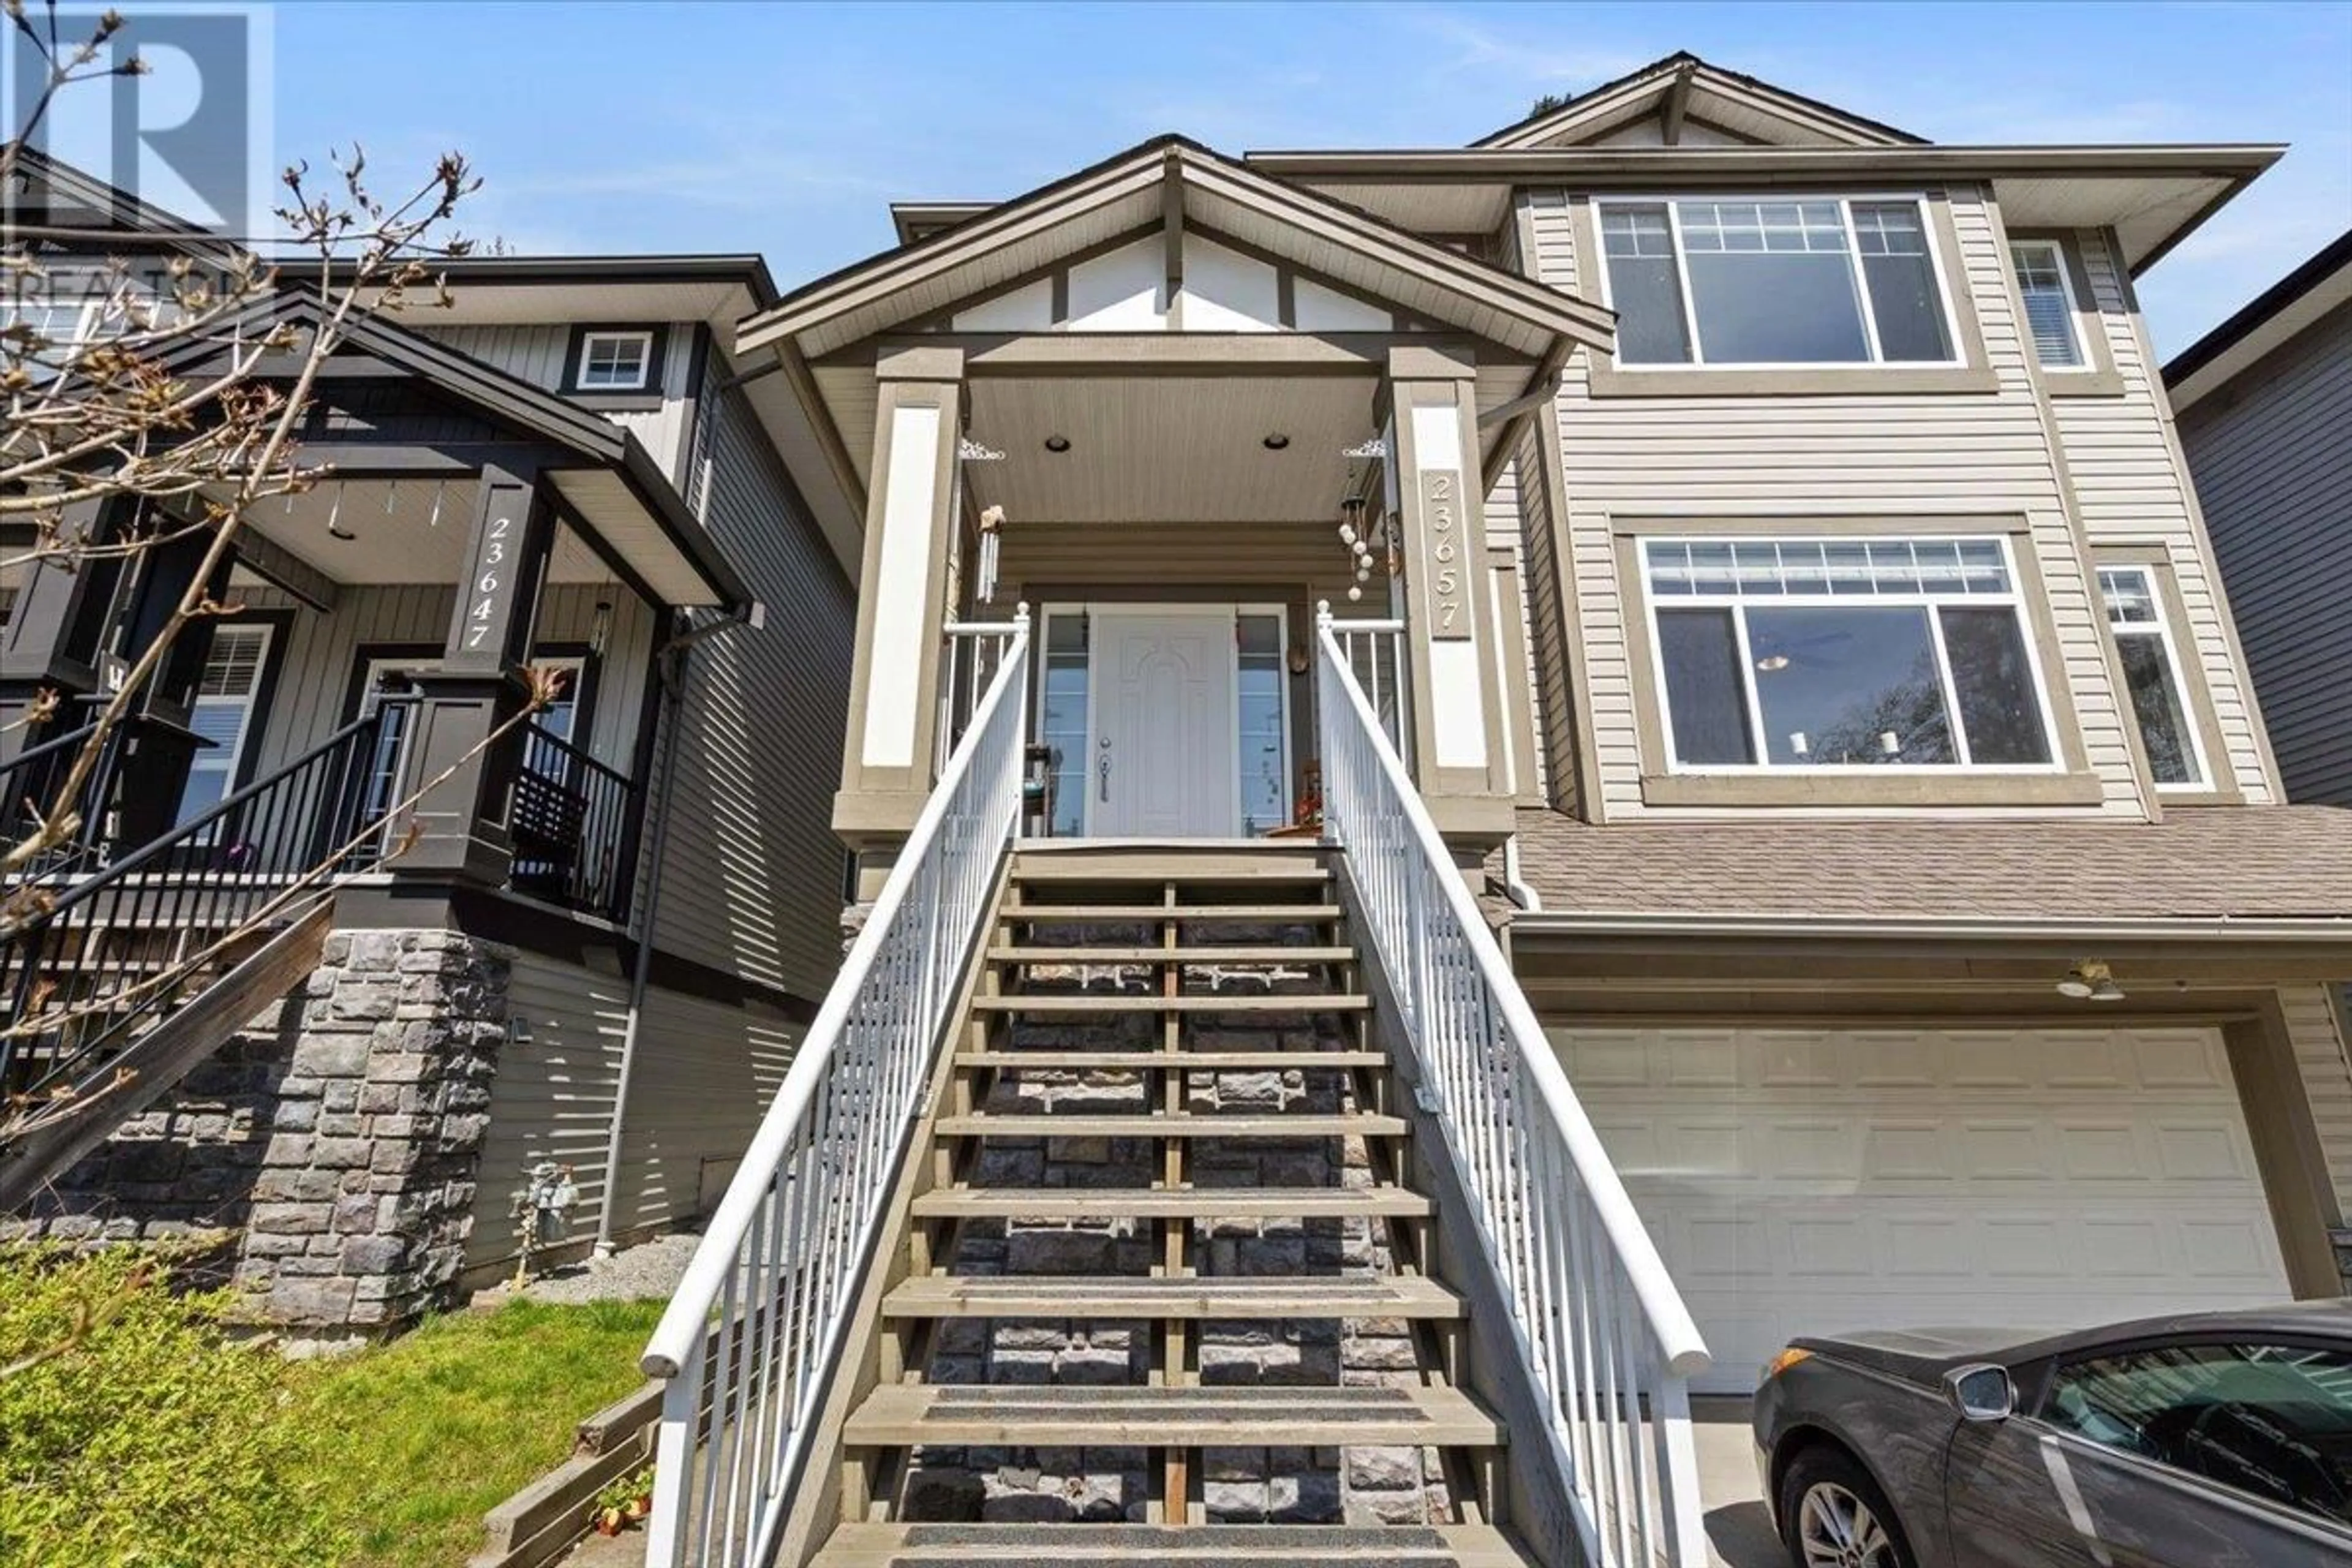 A pic from exterior of the house or condo for 23657 111A AVENUE, Maple Ridge British Columbia V2W2G1